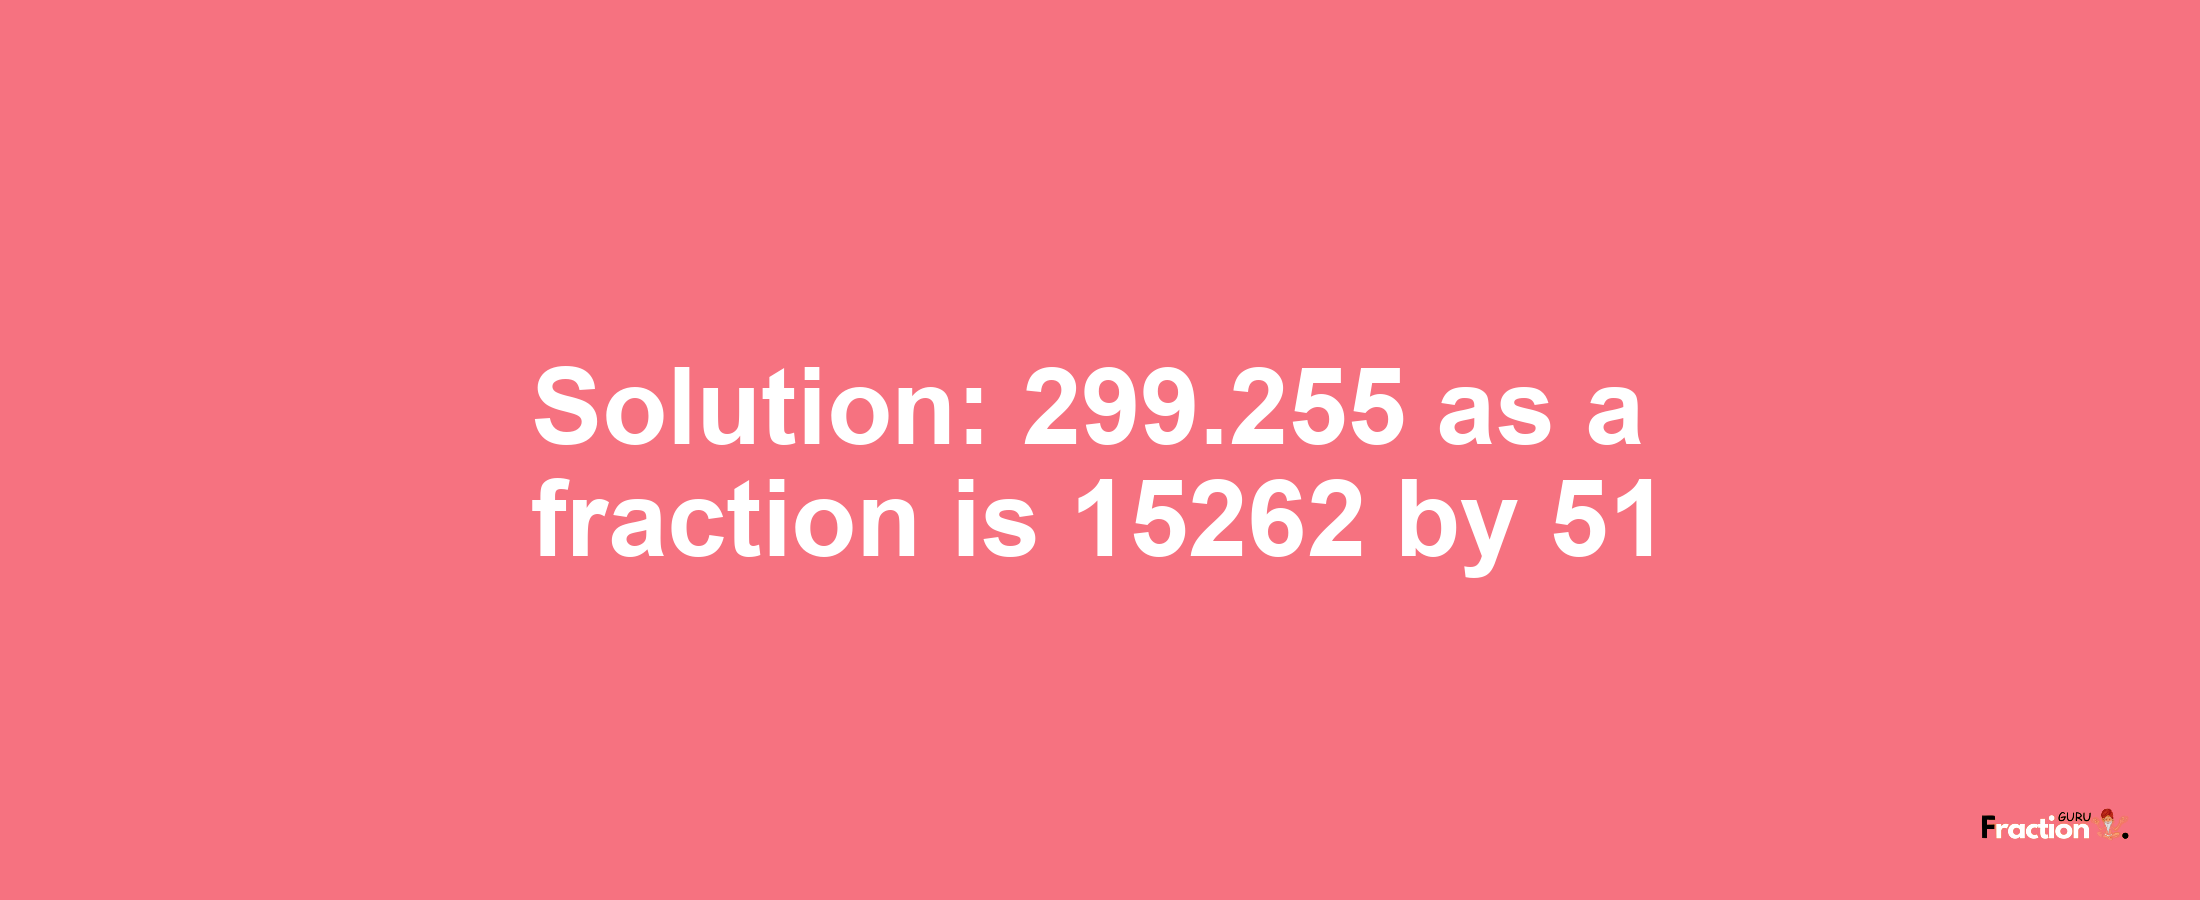 Solution:299.255 as a fraction is 15262/51